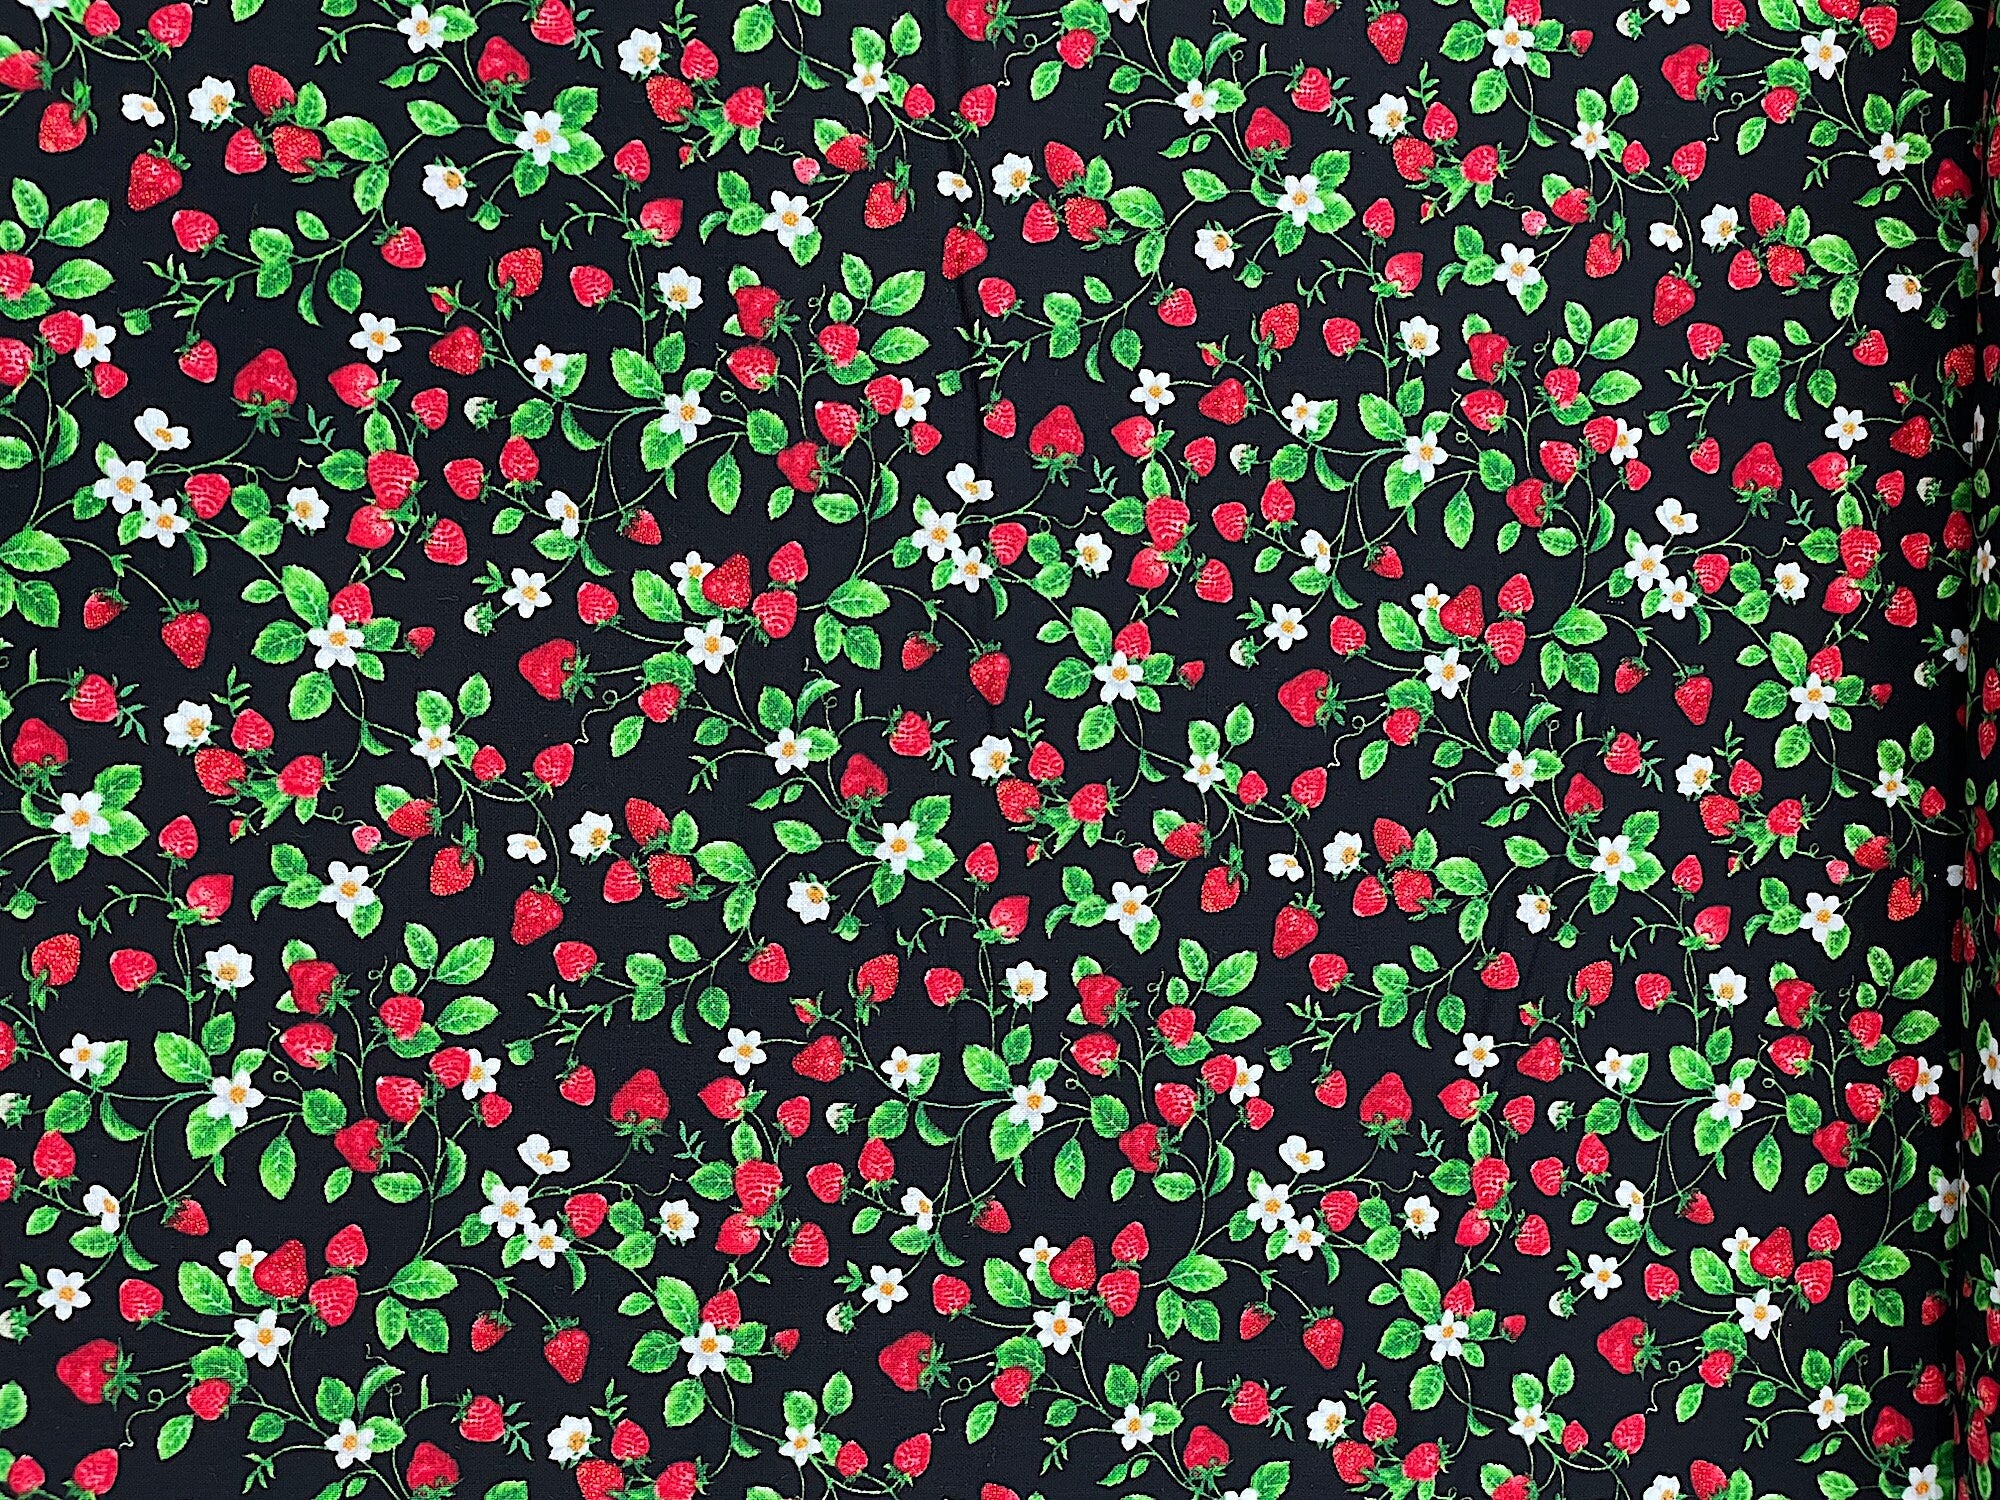 This black cotton fabric is covered with strawberries that are on the vine. There are also flowers and leaves on the vines on this strawberry fabric.